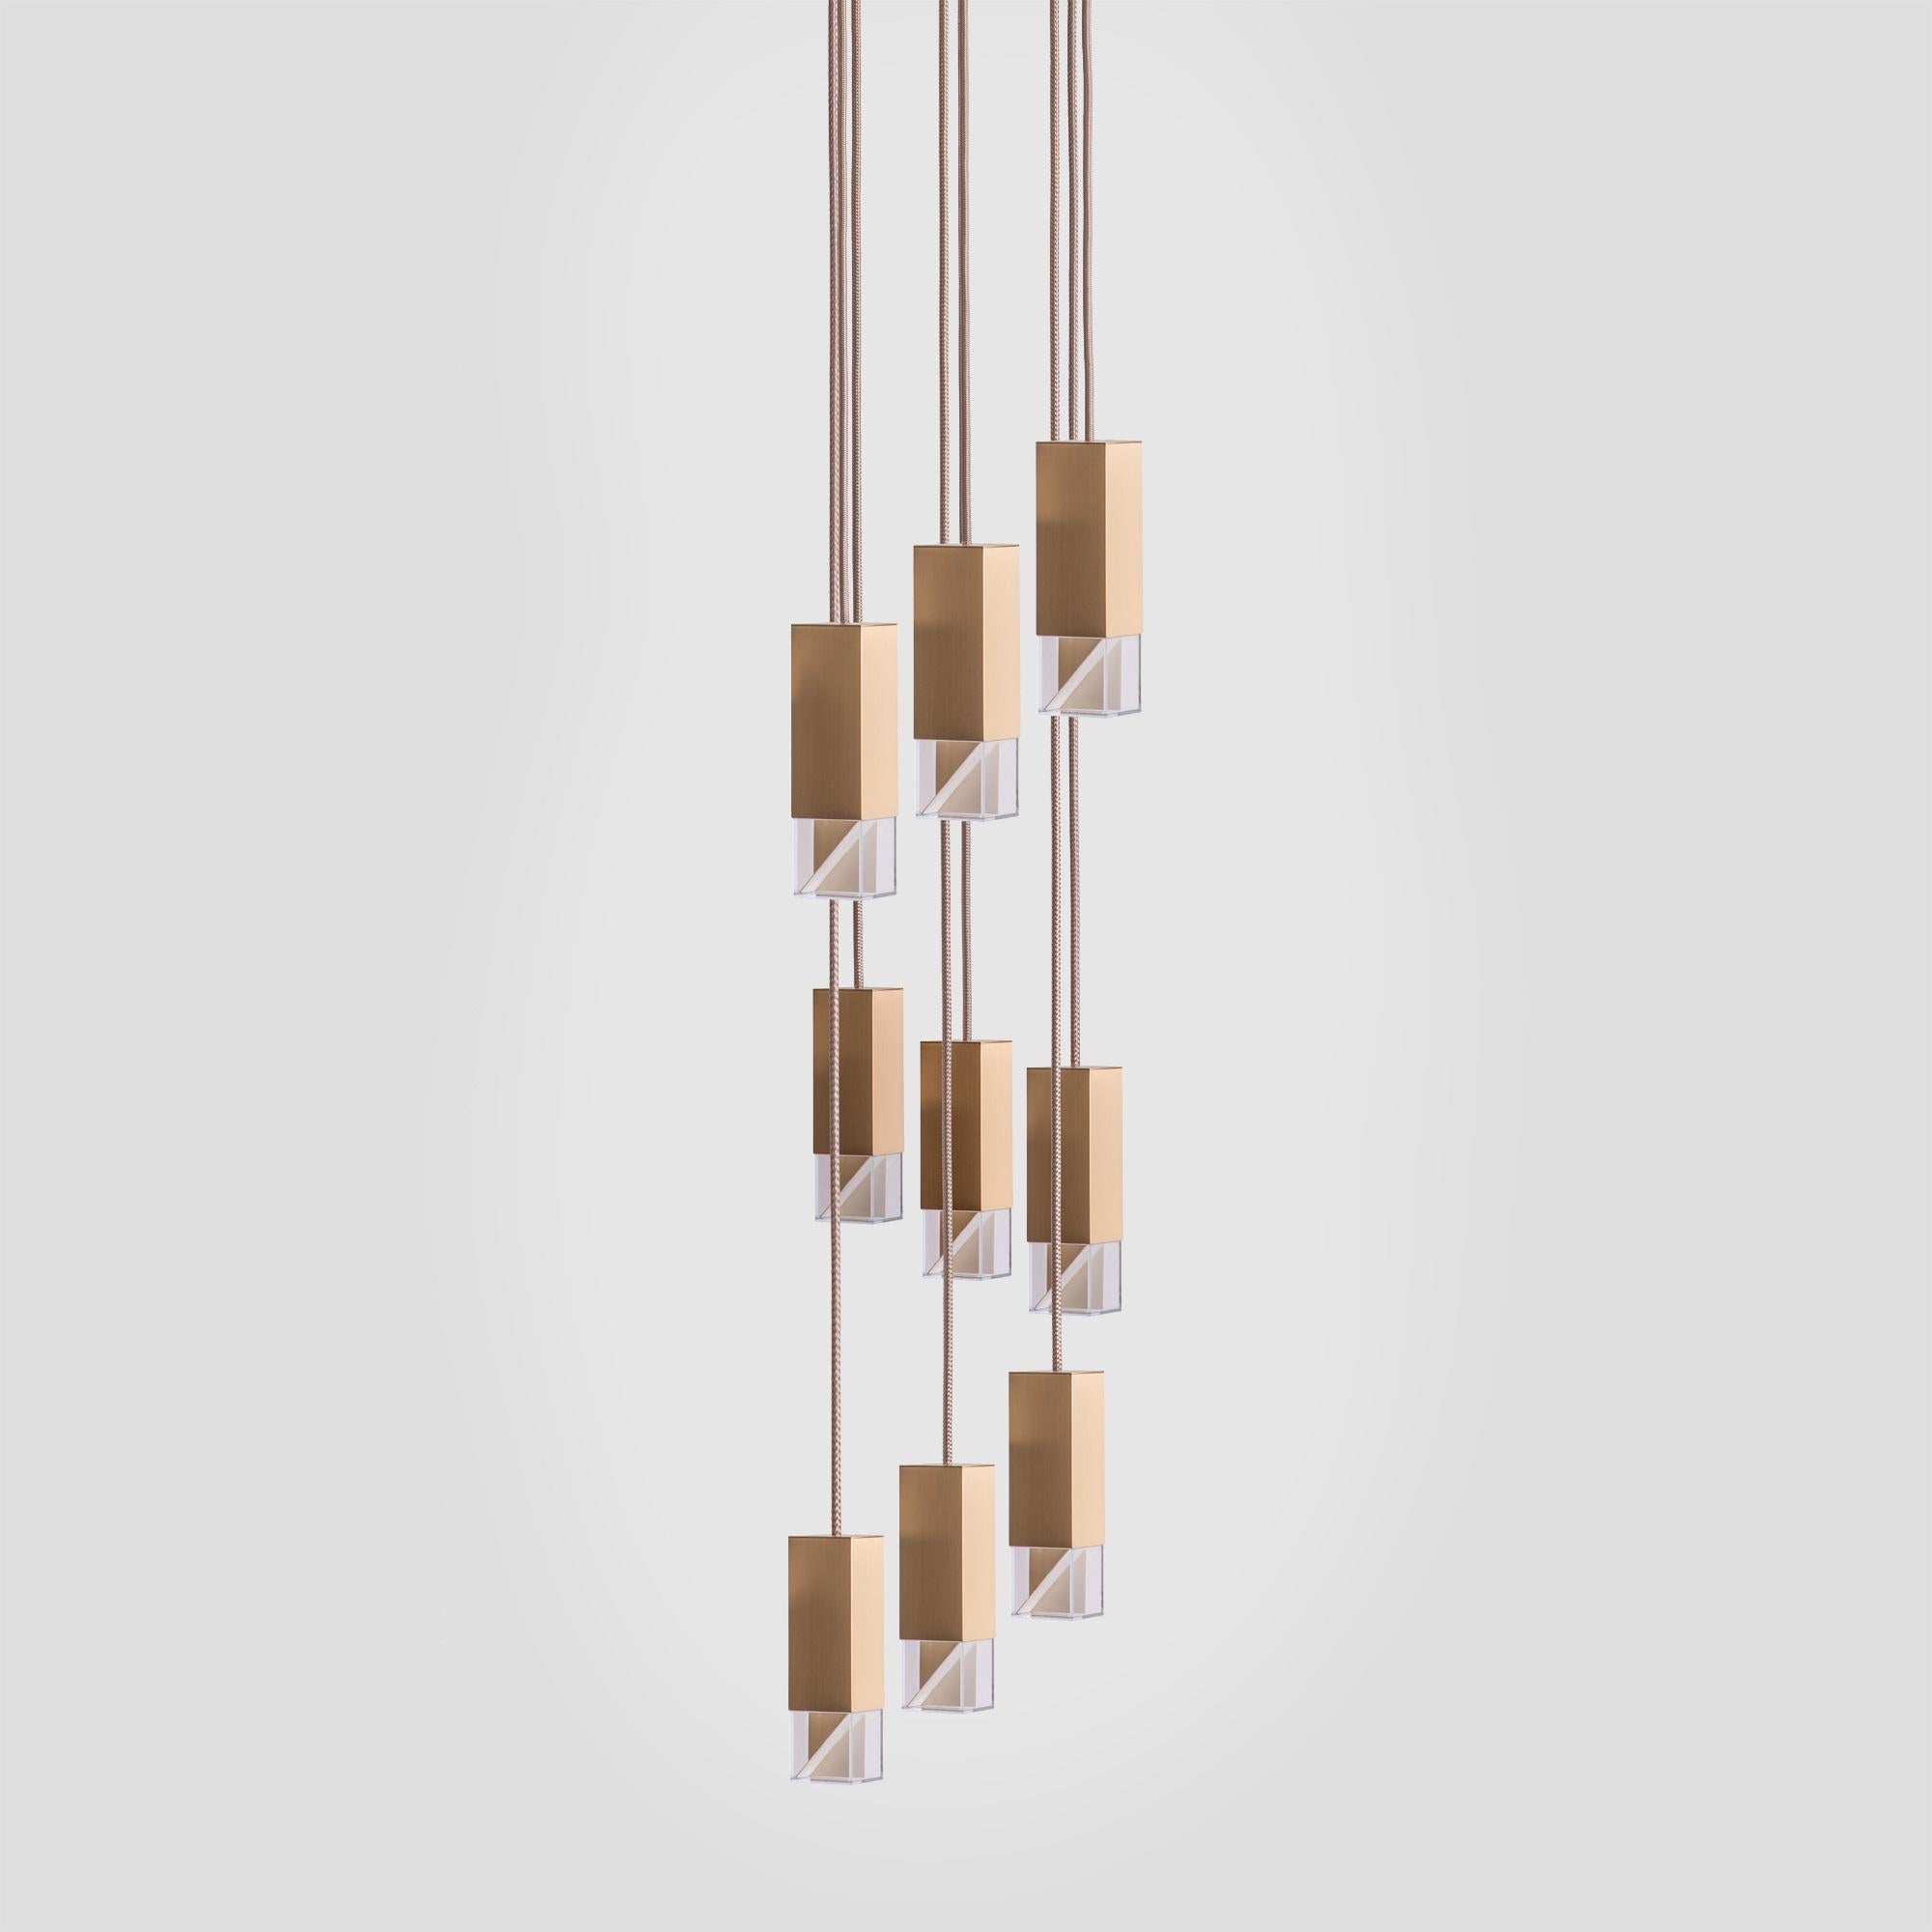 This stunning chandelier will be a captivating addition to any high-ceiling interior, where its architectural construction can be showcased in full details. Composed of nine shades suspended from a square satin-brass ceiling plate (30 x 30cm) with